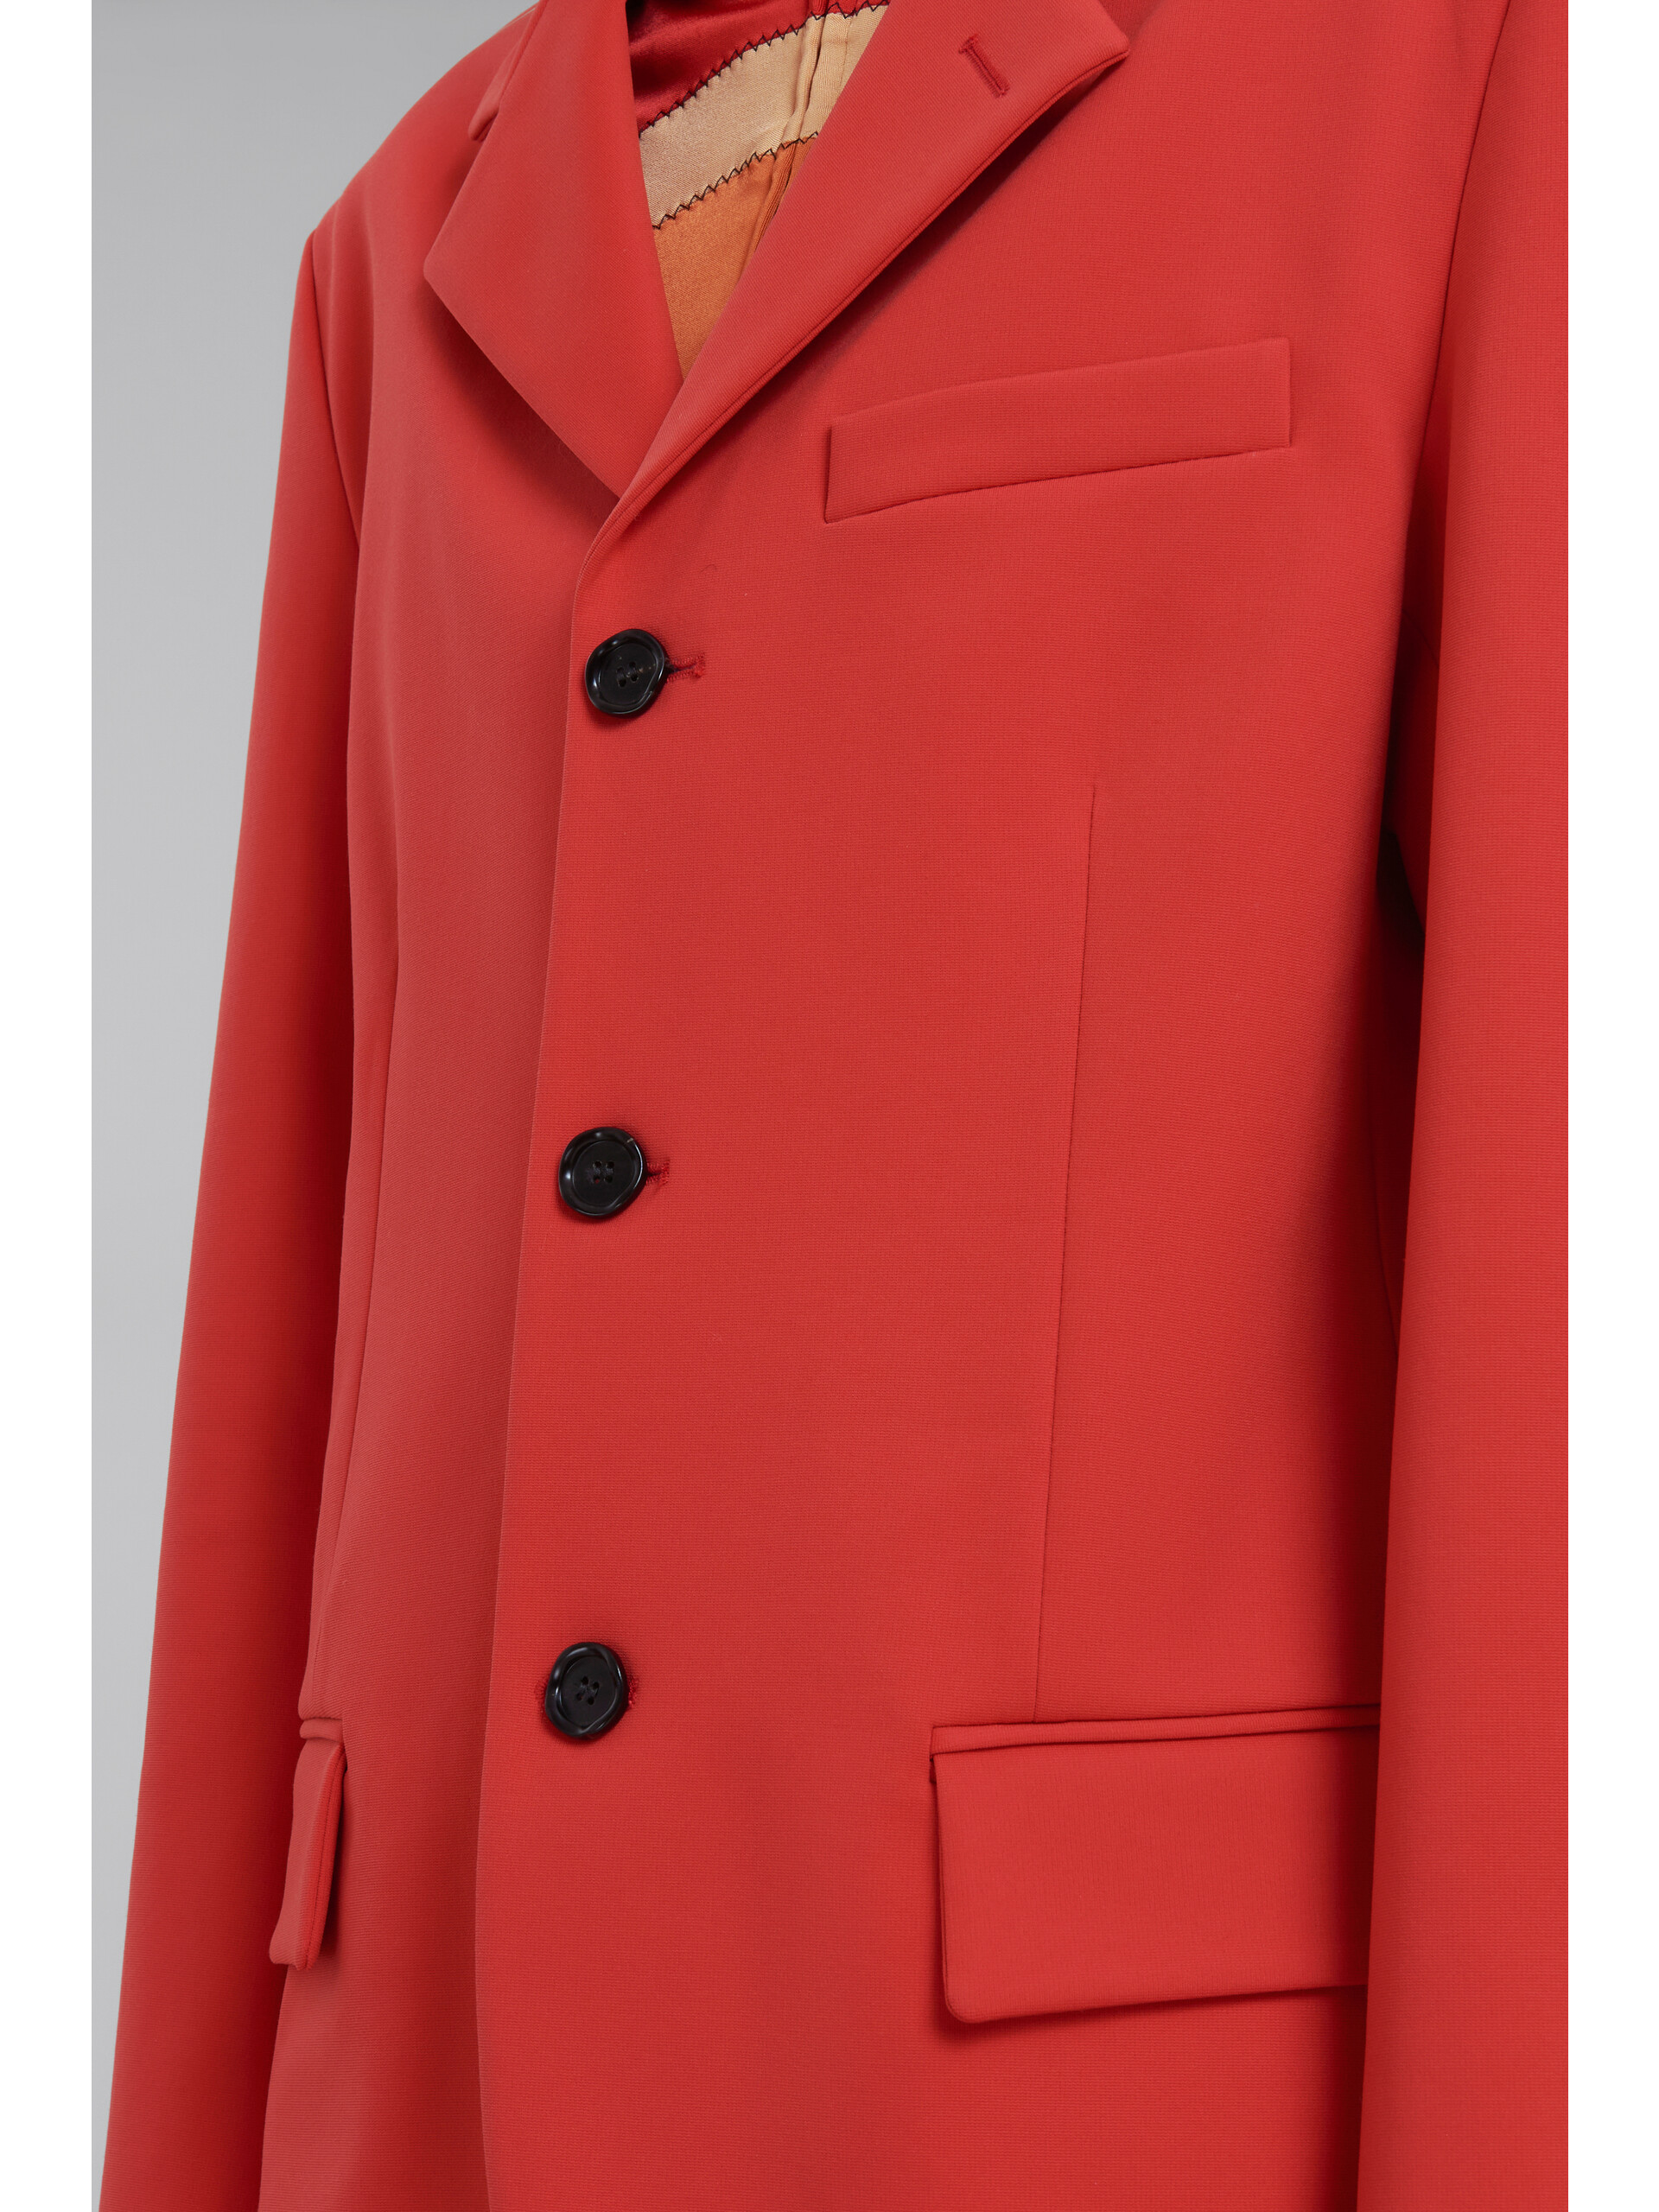 Red single-breasted jersey blazer - Jackets - Image 5